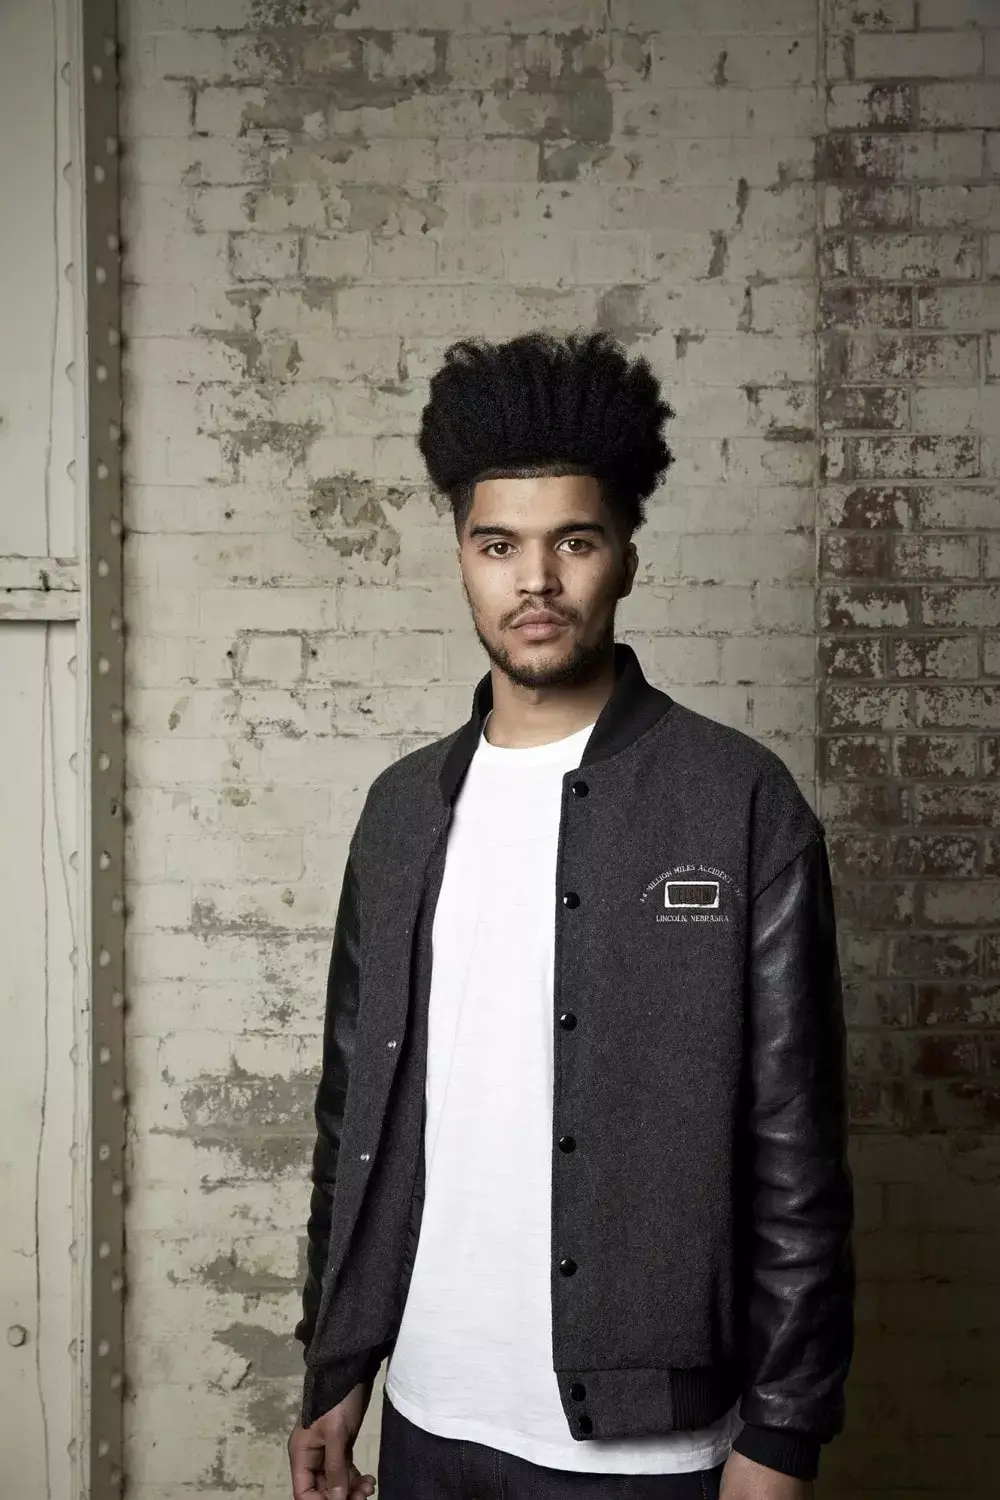 Man with high top afro with beard and white shirt and grey jacket